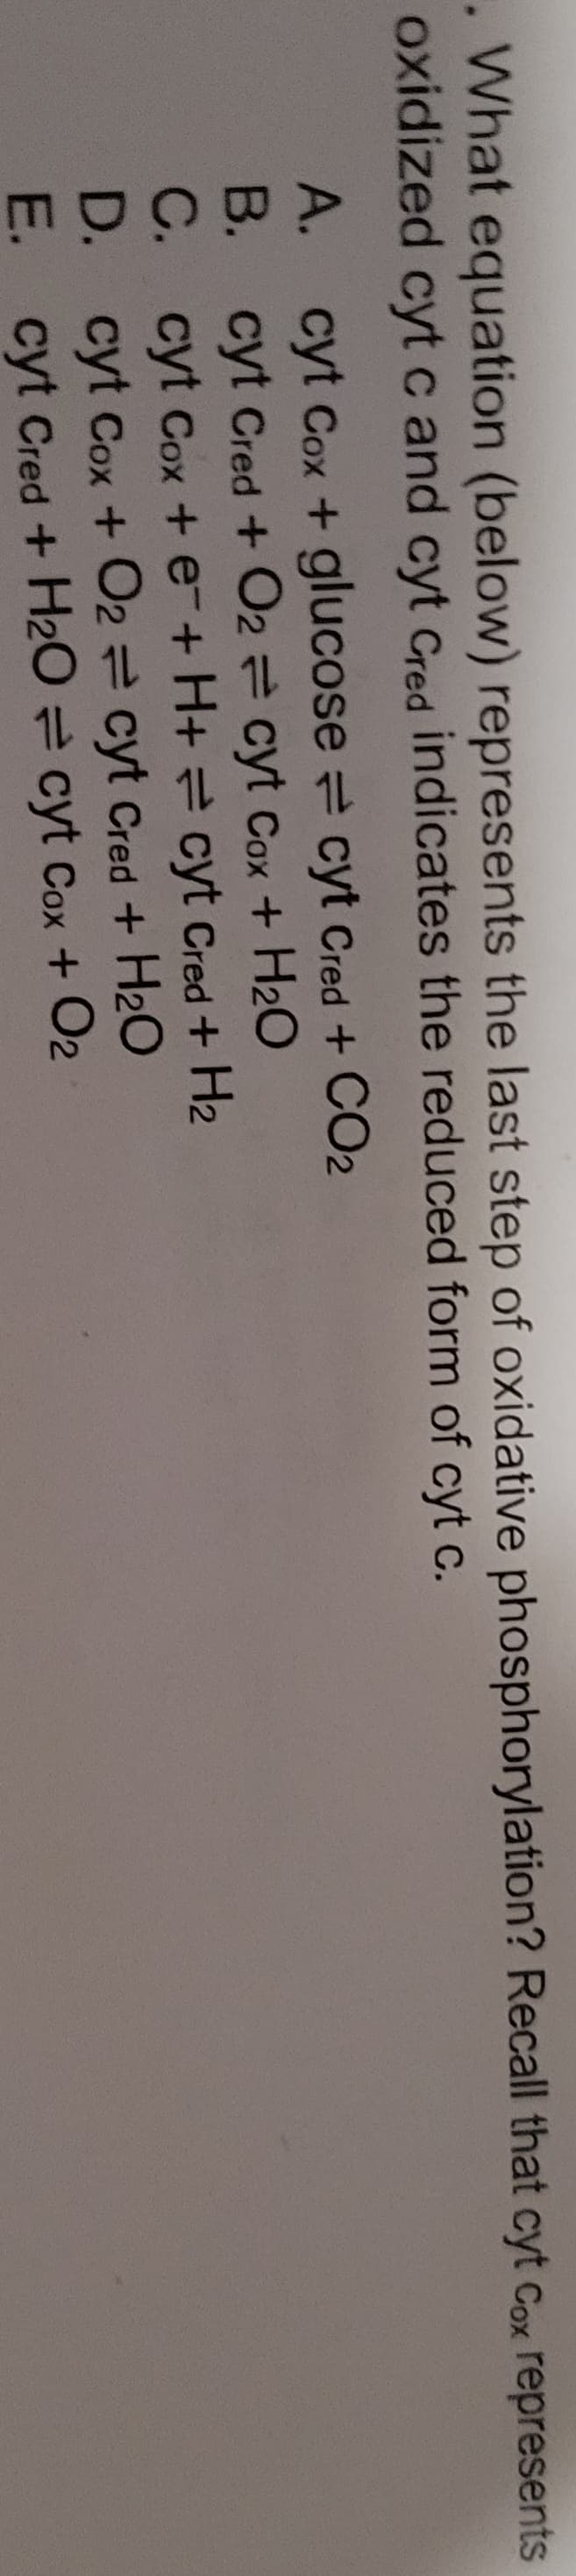 . What equation (below) represents the last step of oxidative phosphorylation? Recall that cyt Cox represents
oxidized cyt c and cyt Cred indicates the reduced form of cyt c.
A.
B.
C.
cyt Cox+ glucose cyt Cred + CO2
cyt Cred + O2 = cyt Cox + H₂O
cyt Cox + e + H+
cyt Cred + H₂
D.
cyt Cox + O2 cyt Cred + H₂O
E. cyt Cred + H₂O
cyt Cox + O2